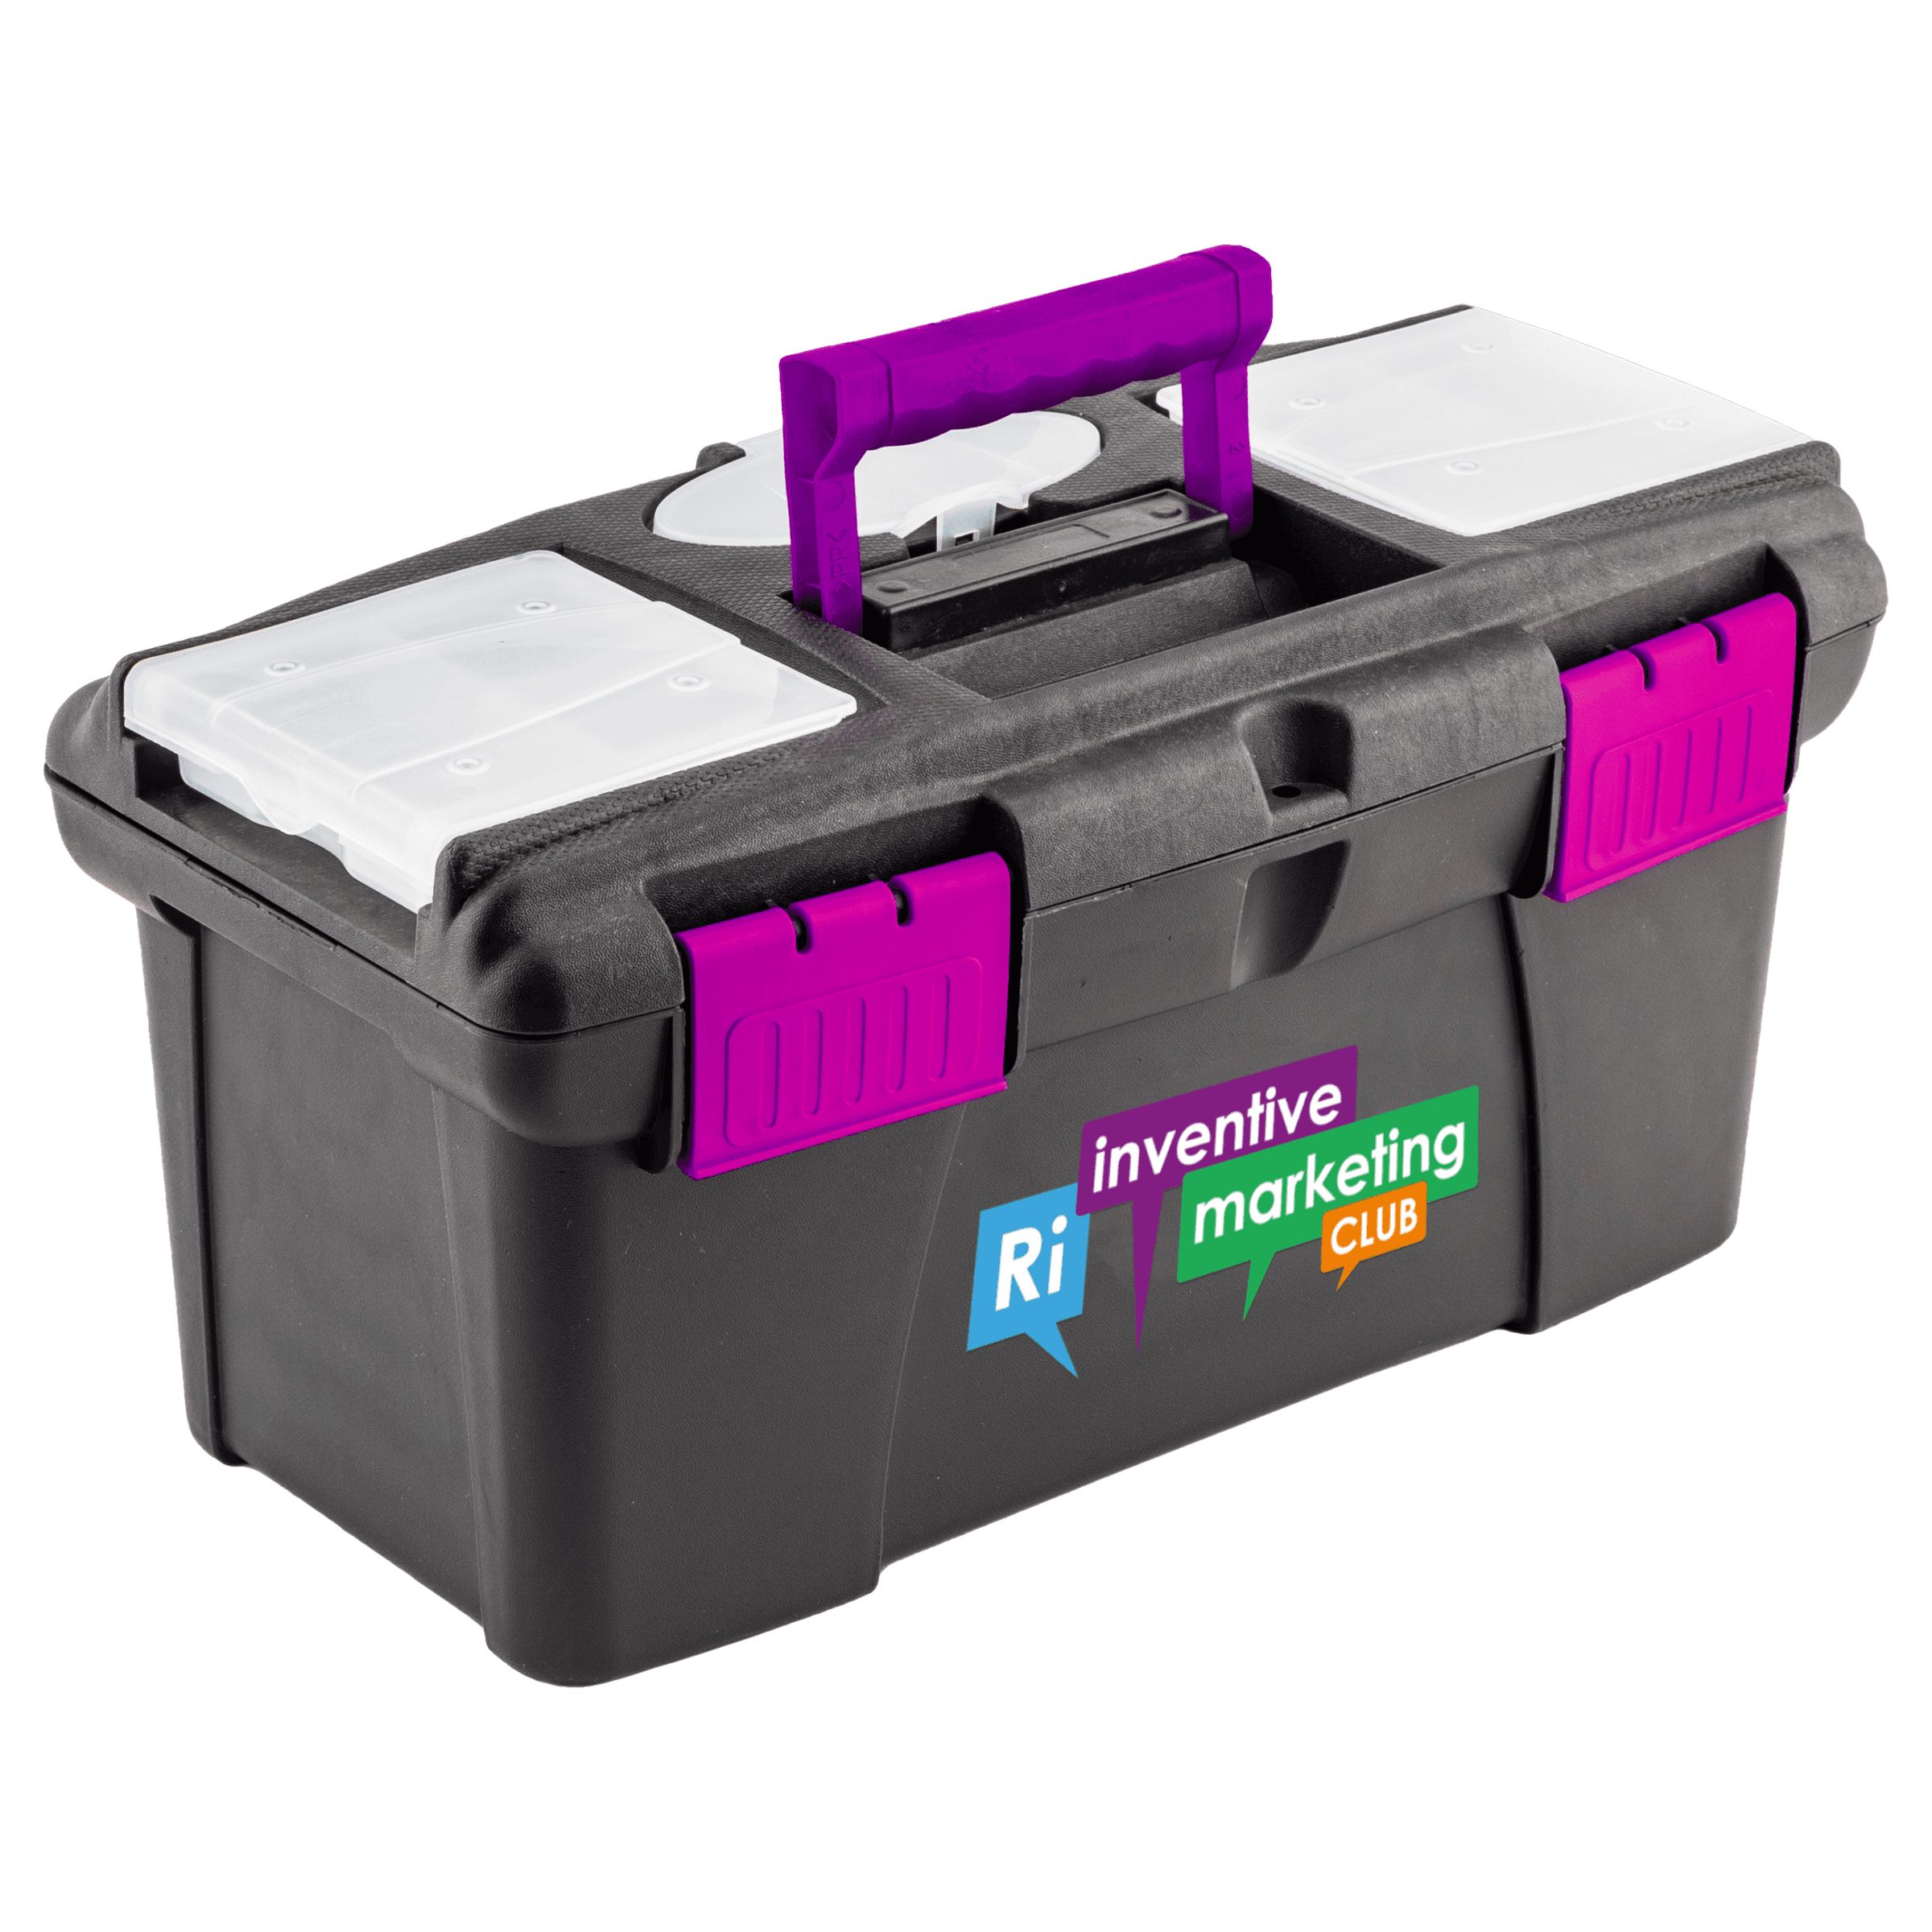 Plastic toolbox with red handle and club logo